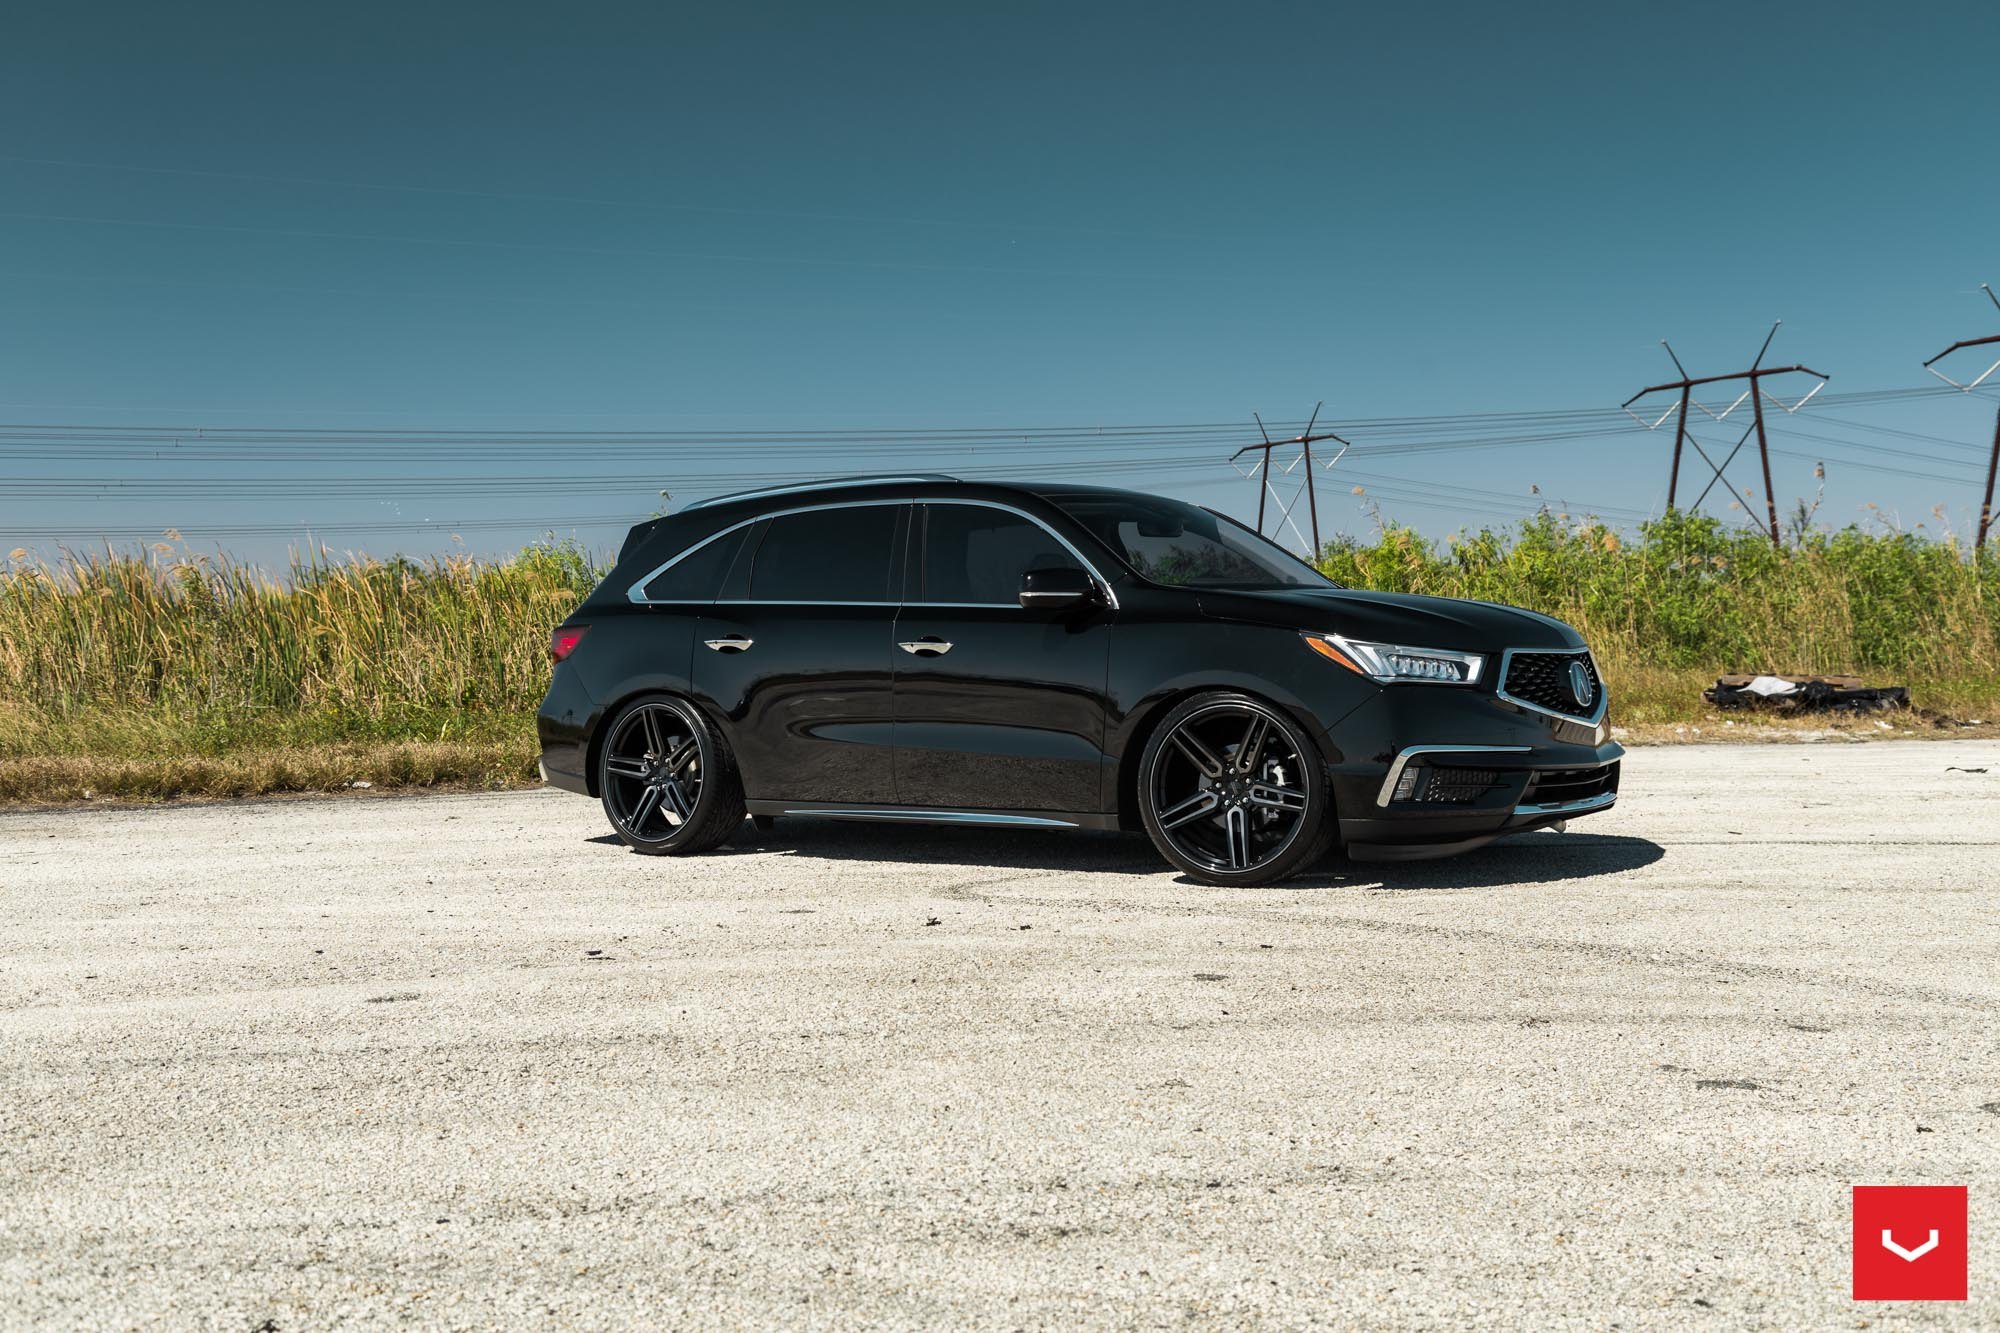 Aftermarket Side Skirts on Black Acura MDX - Photo by Vossen